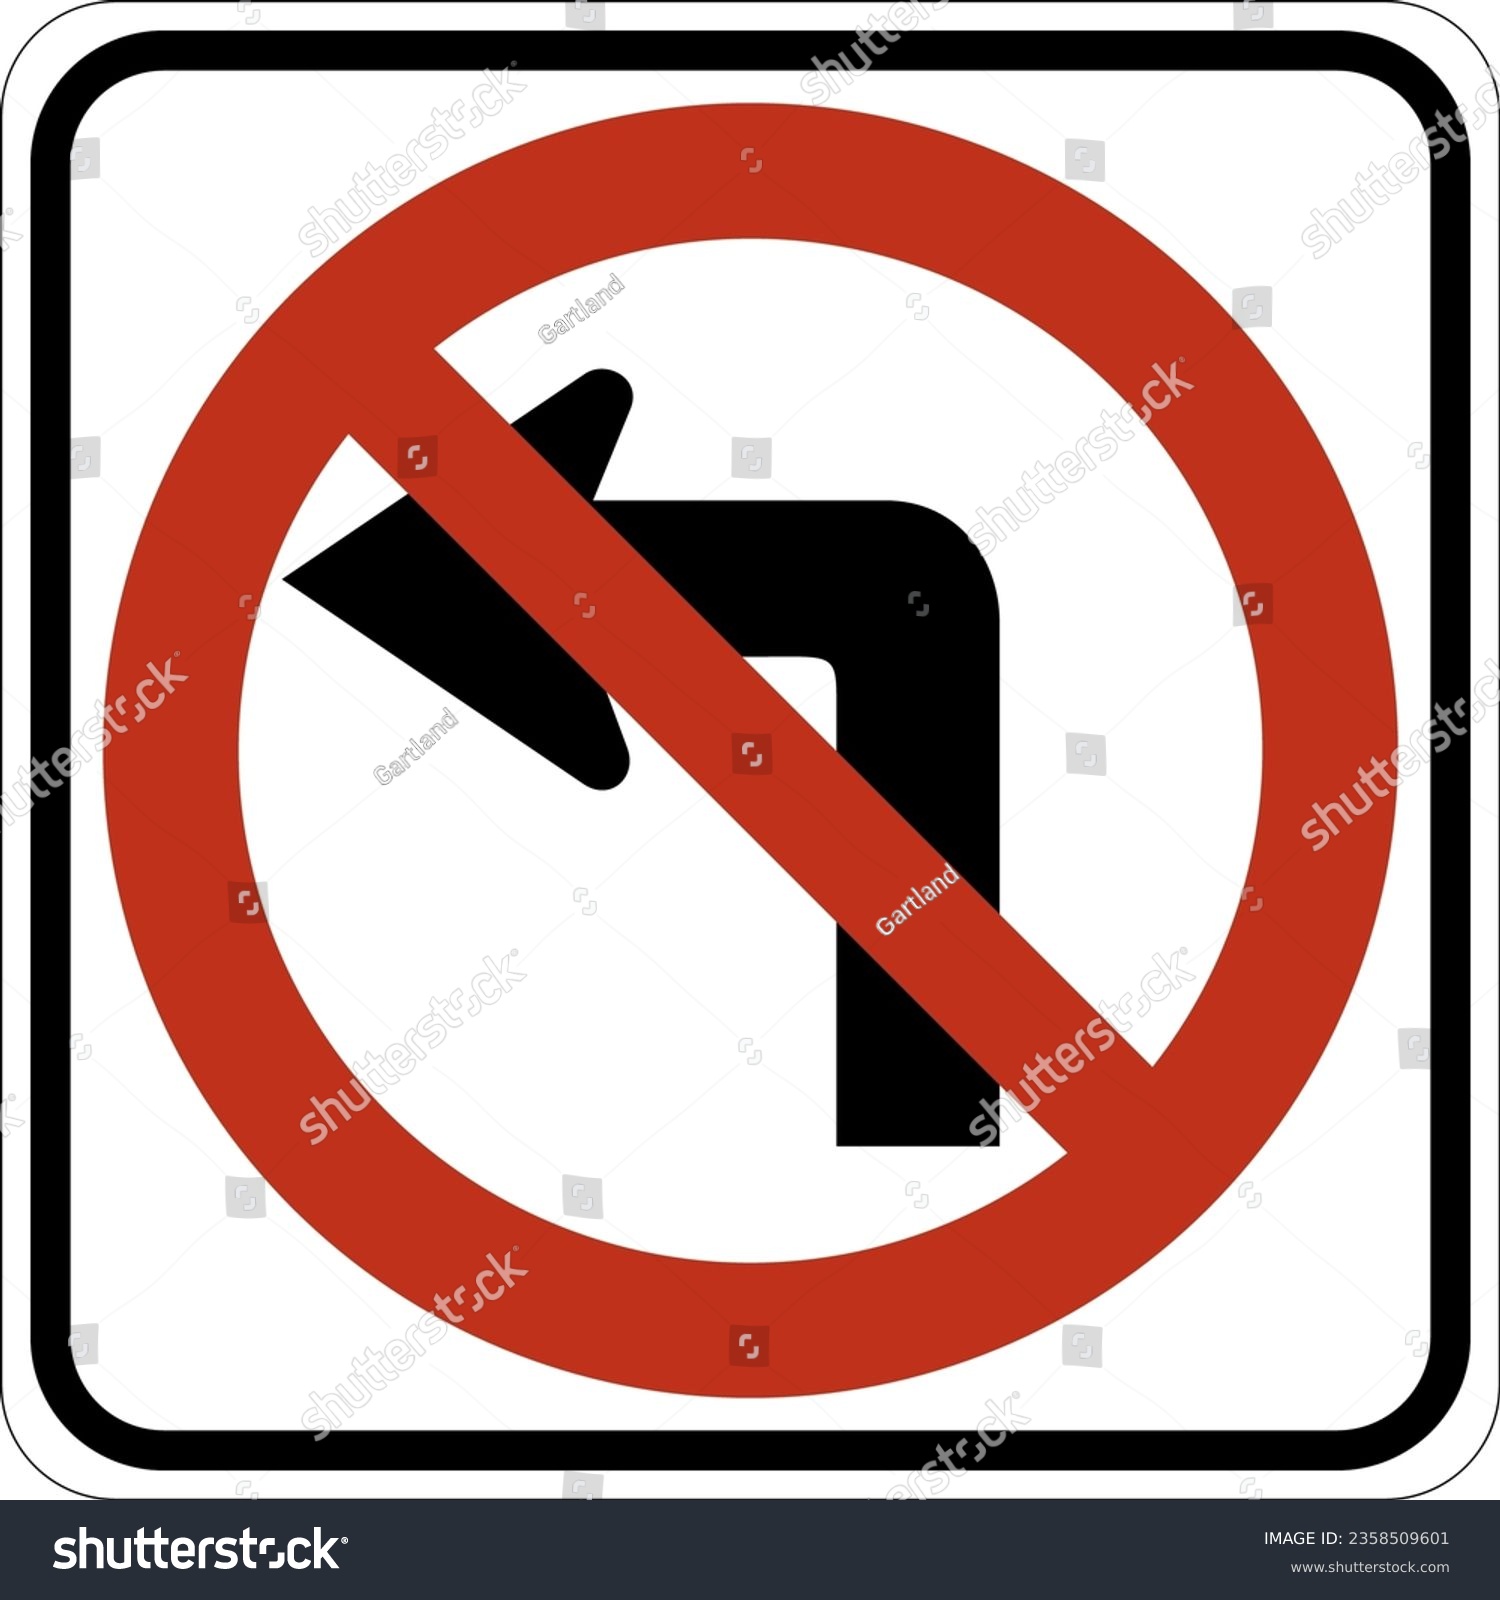 SVG of Vector graphic of a usa No Left Turn highway sign. It consists of a red circle with a red diagonal bar obscuring an arrow with a left pointing, right angle bend contained in a white rectangle svg